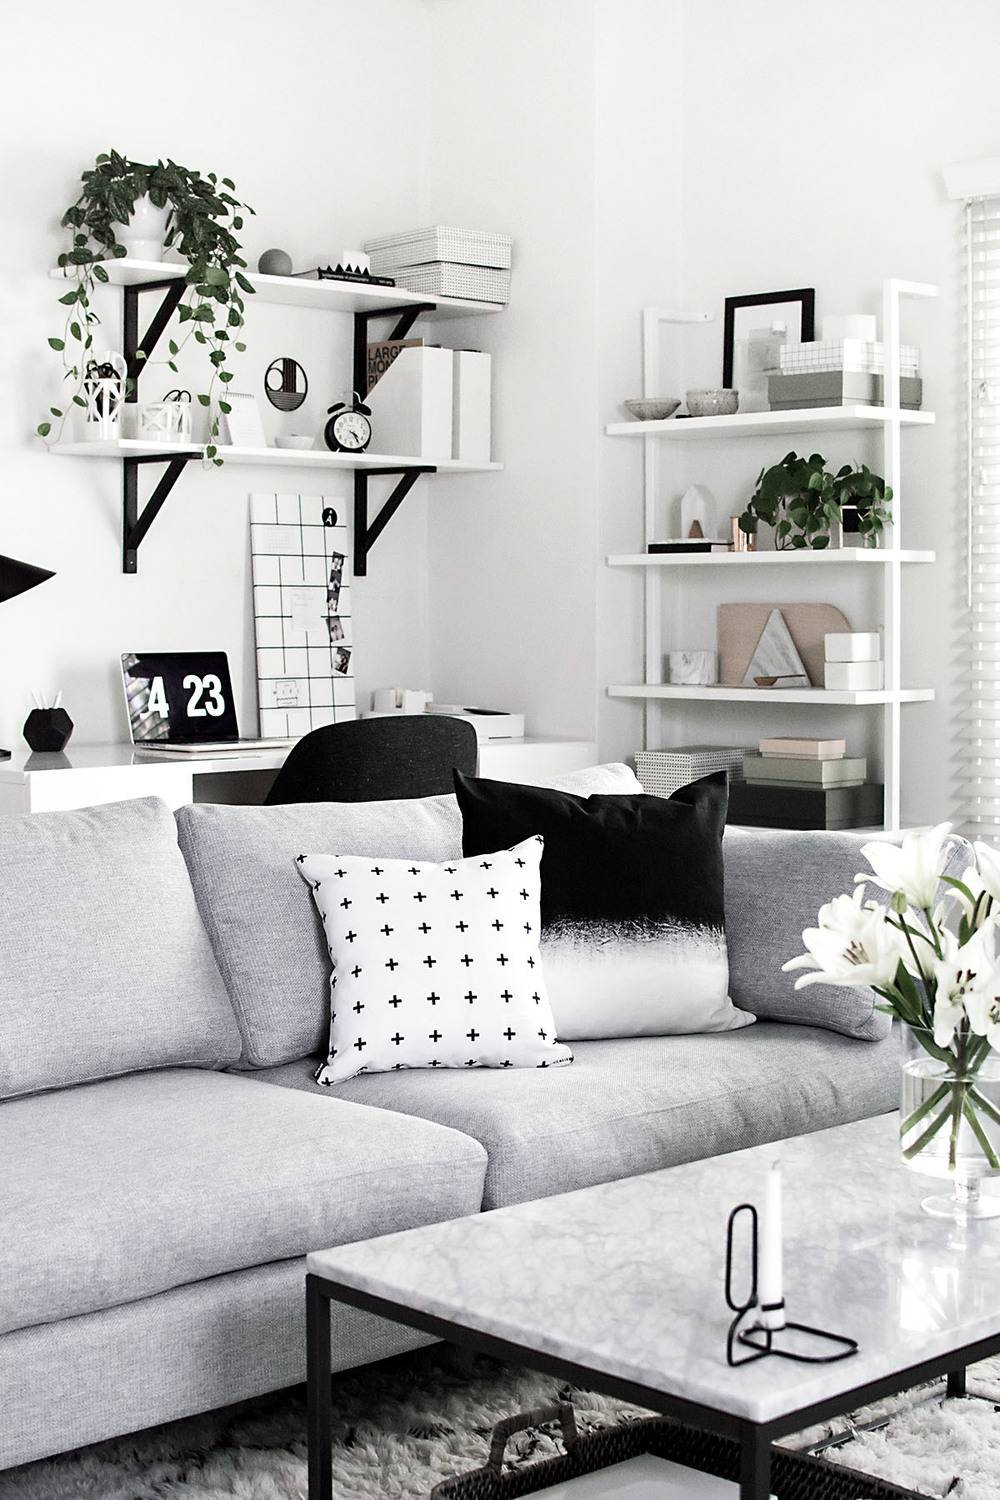 Eye Candy: 10 Droolworthy Scandinavian Style Living Rooms